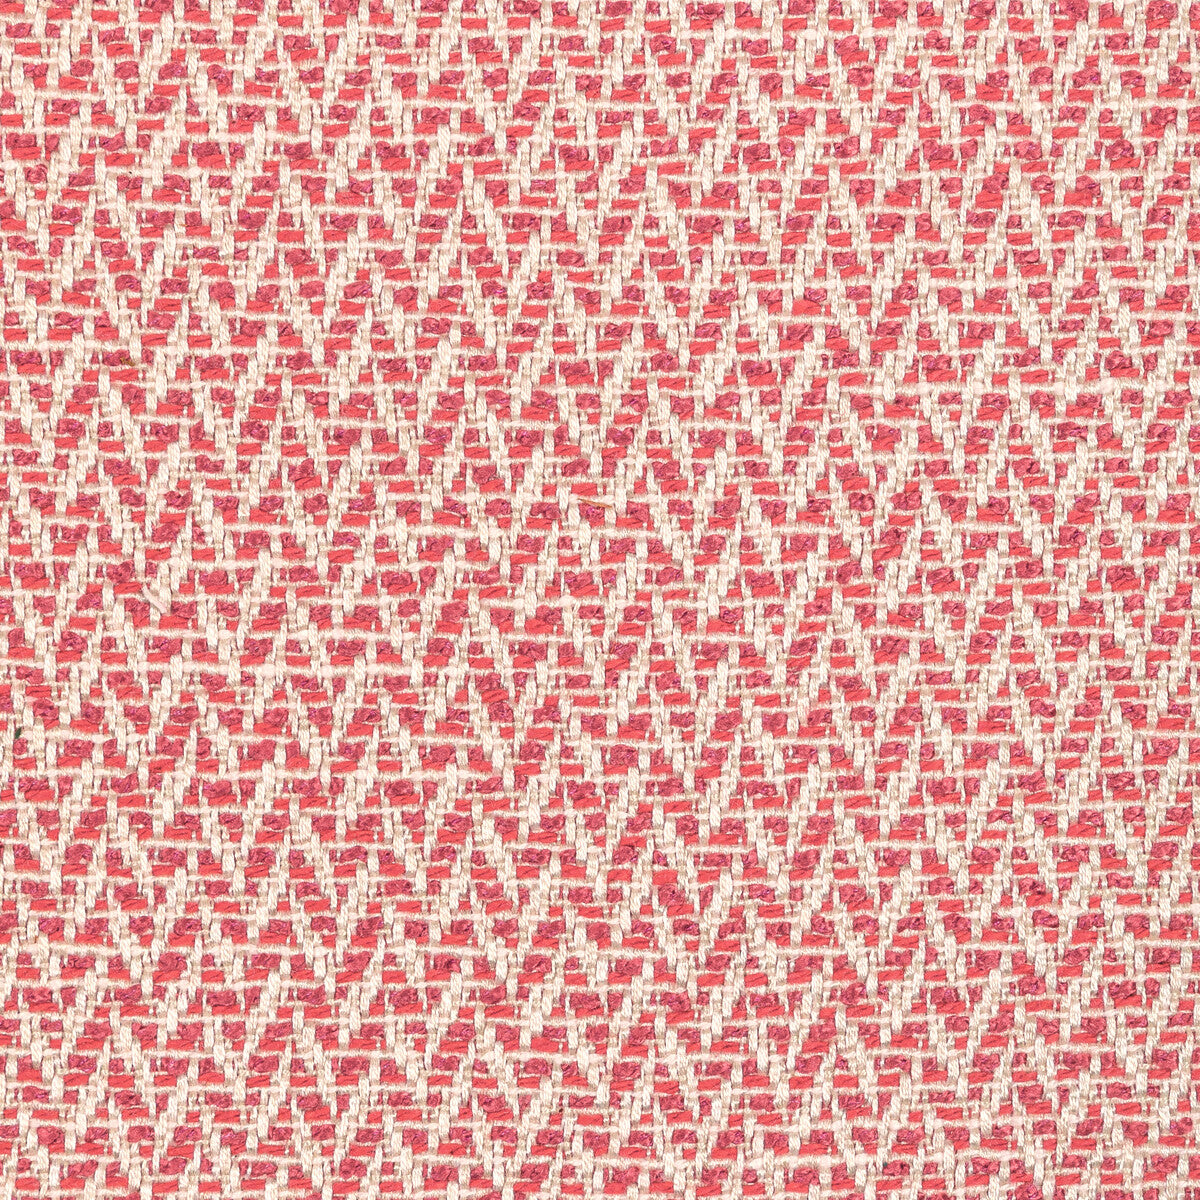 Kravet Design fabric in 36418-7 color - pattern 36418.7.0 - by Kravet Design in the Performance Crypton Home collection